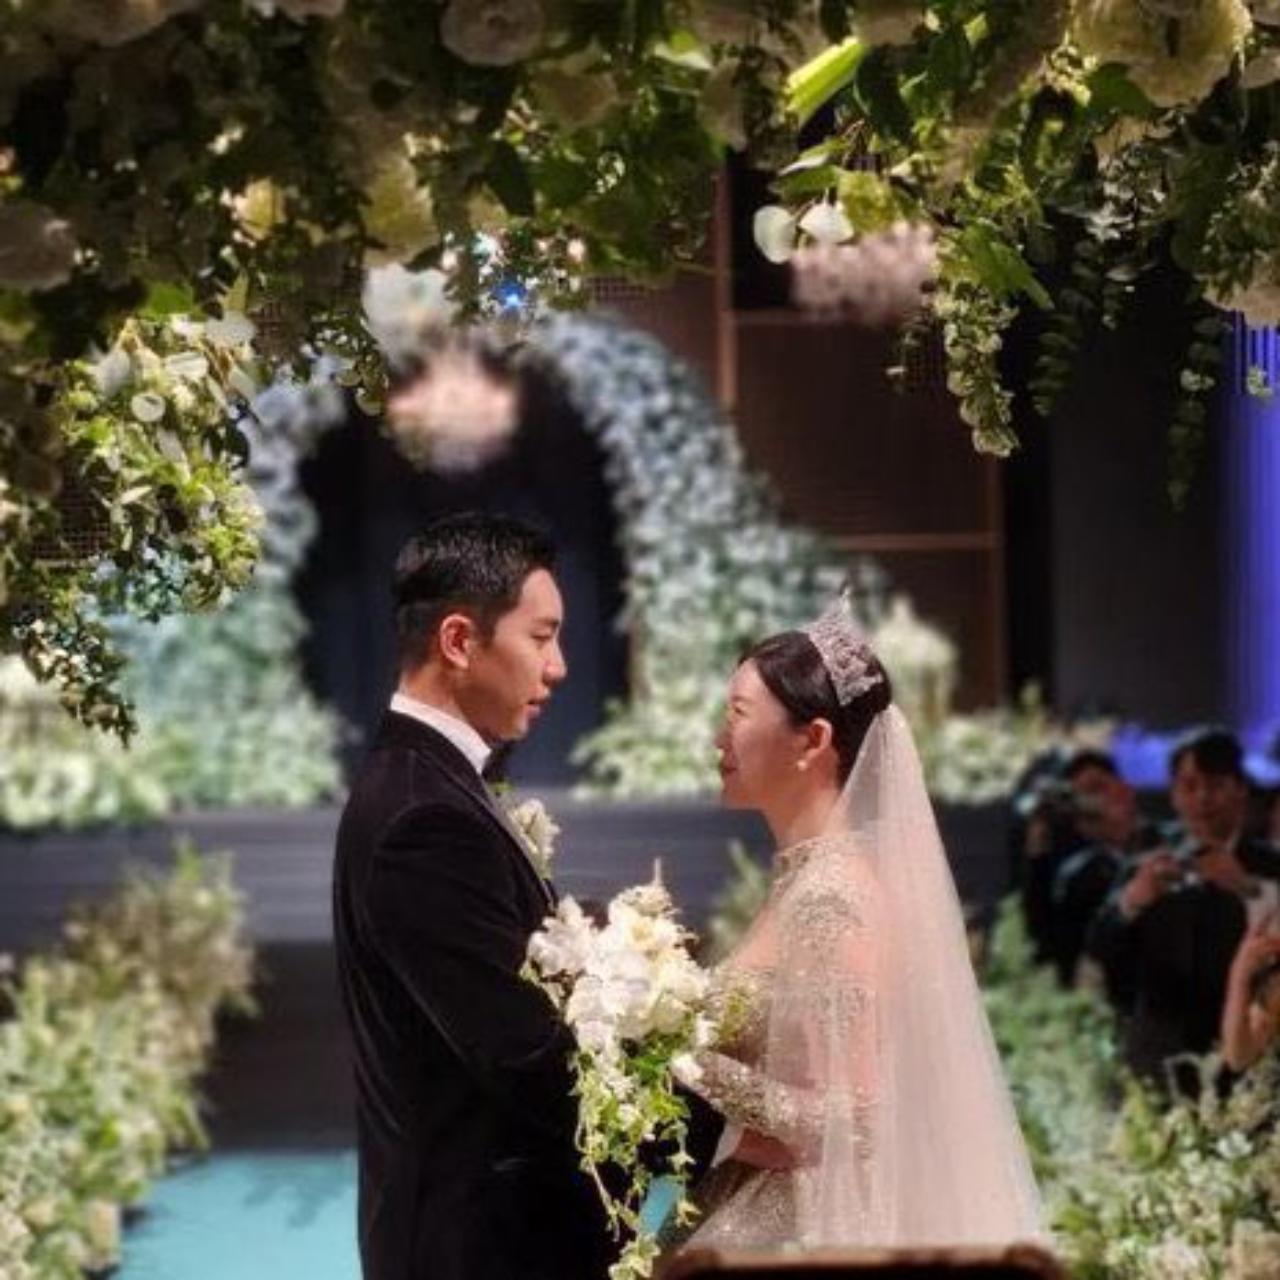 For the wedding ceremony, Lee Seung-gi opted for a classic black tuxedo, white shirt, and black bow